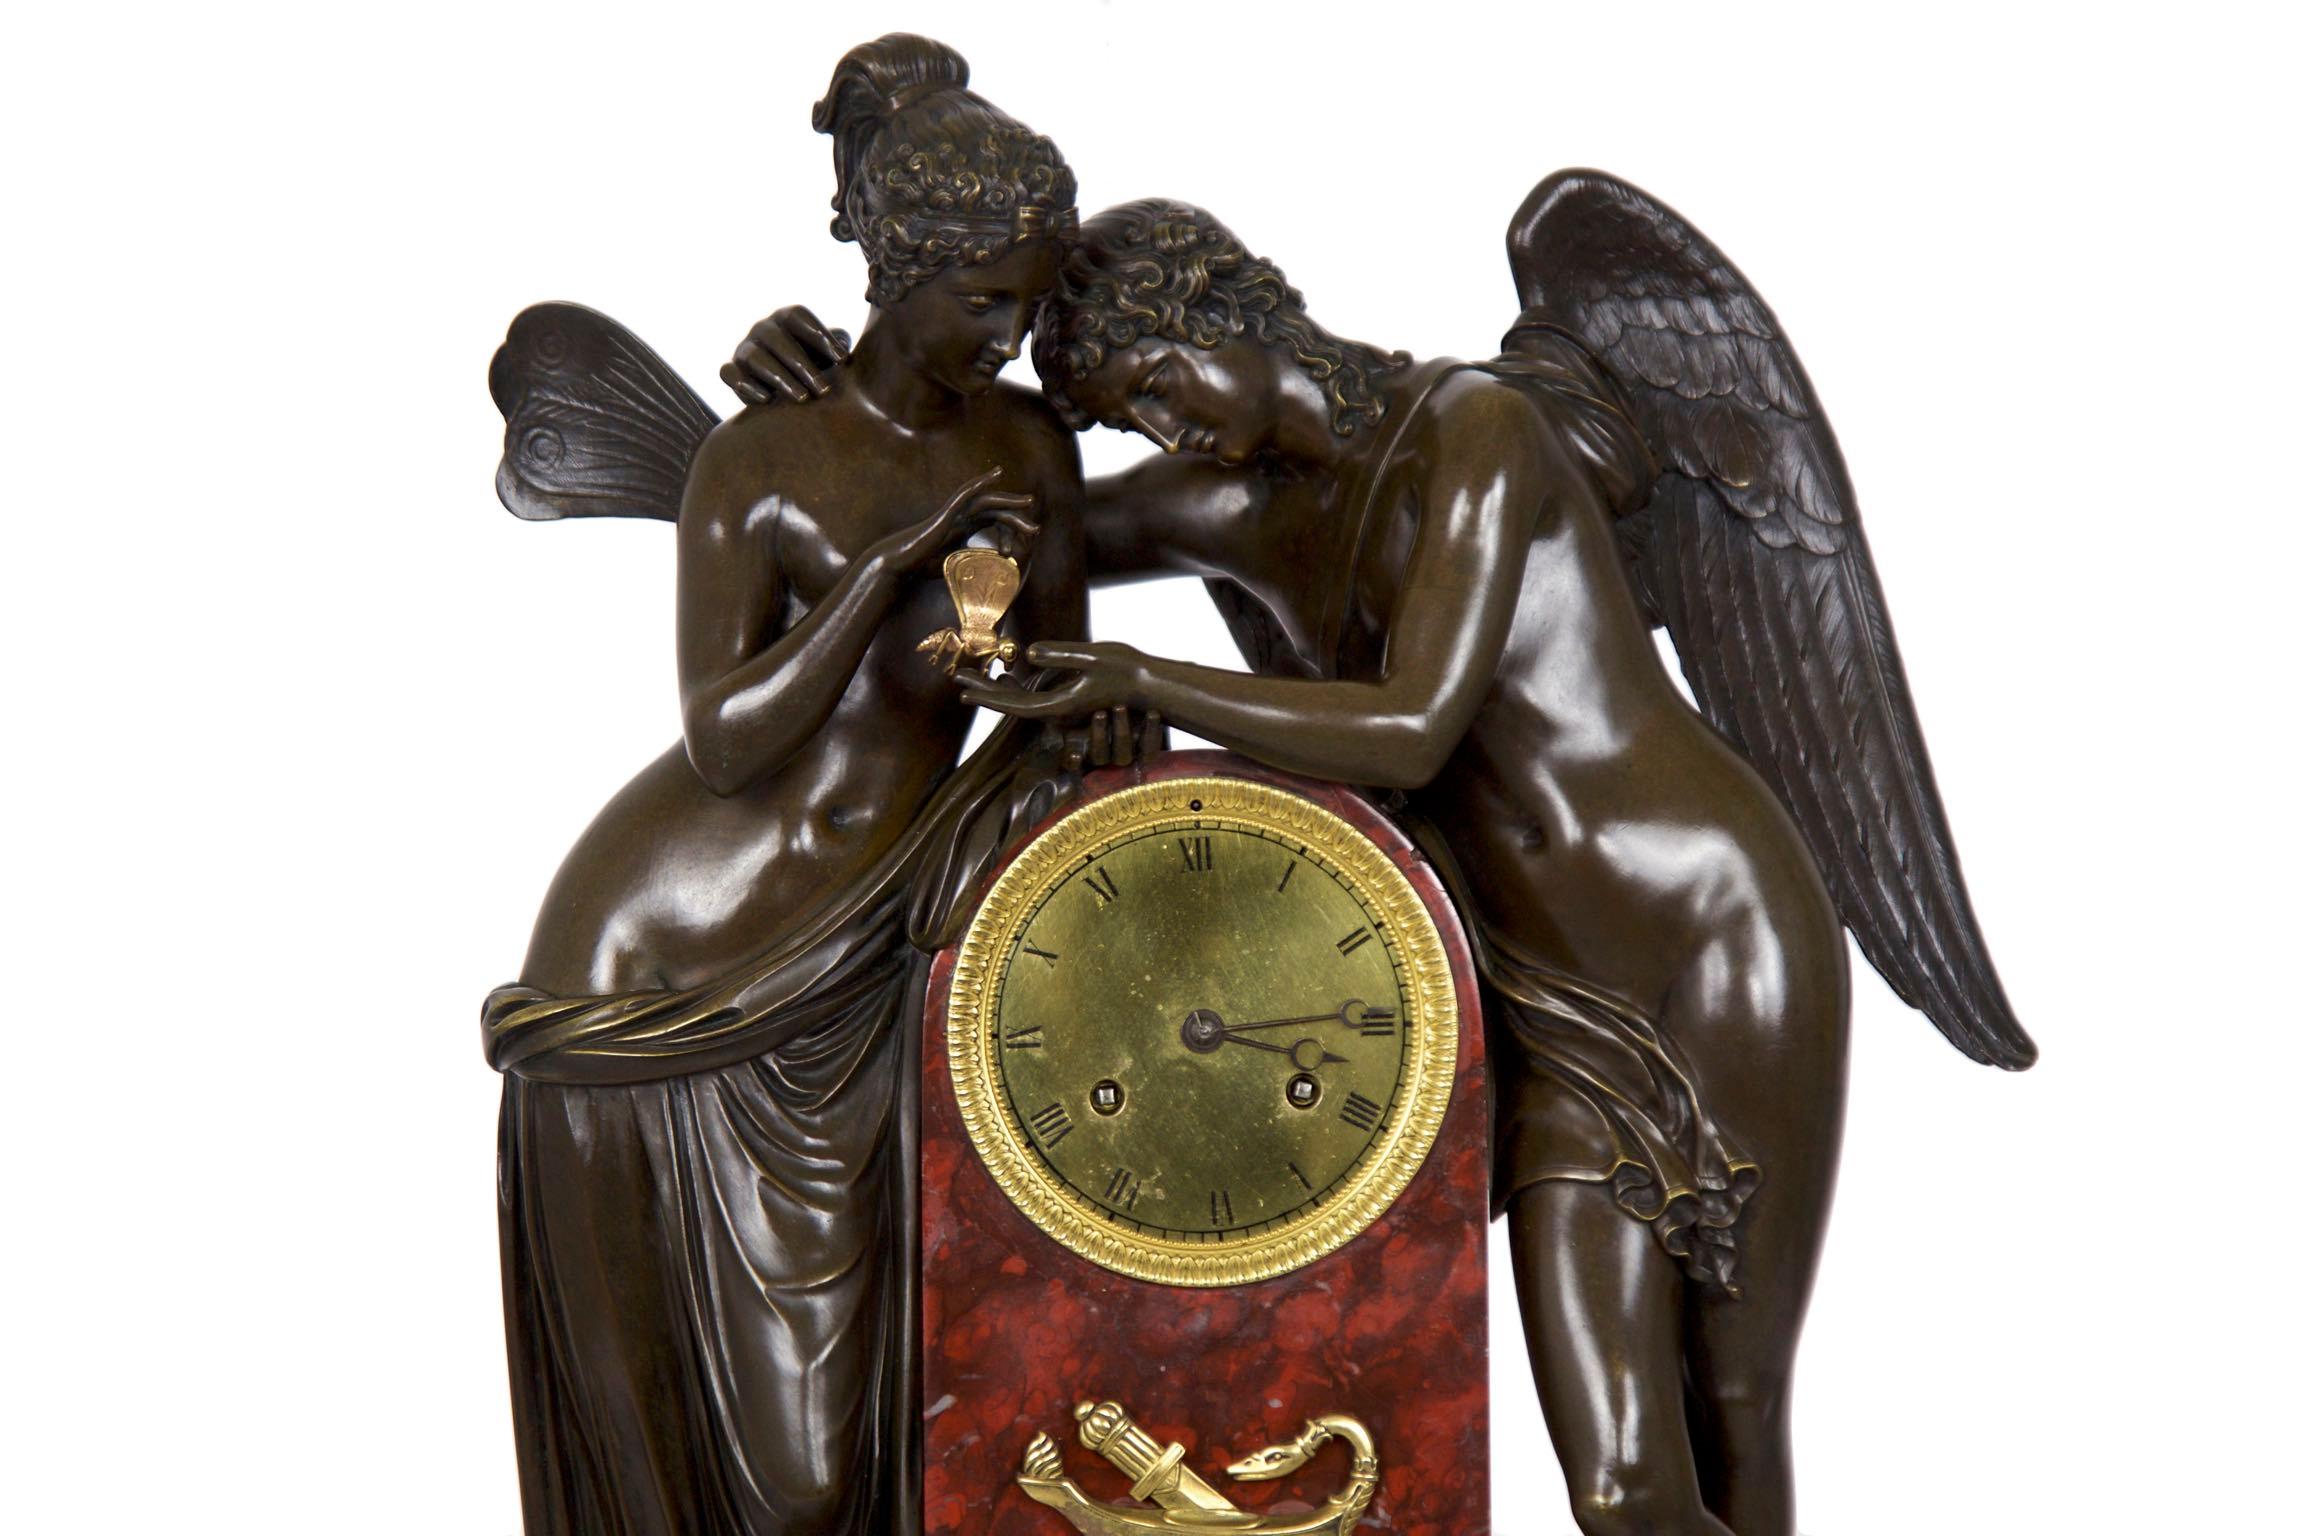 An exceptional Restauration period mantel clock with finely chiseled elements throughout, this work captures Psyche placing a butterfly into the open palm of Cupid. Each figure is cast with incredible skill, this self evident in the difficult areas: